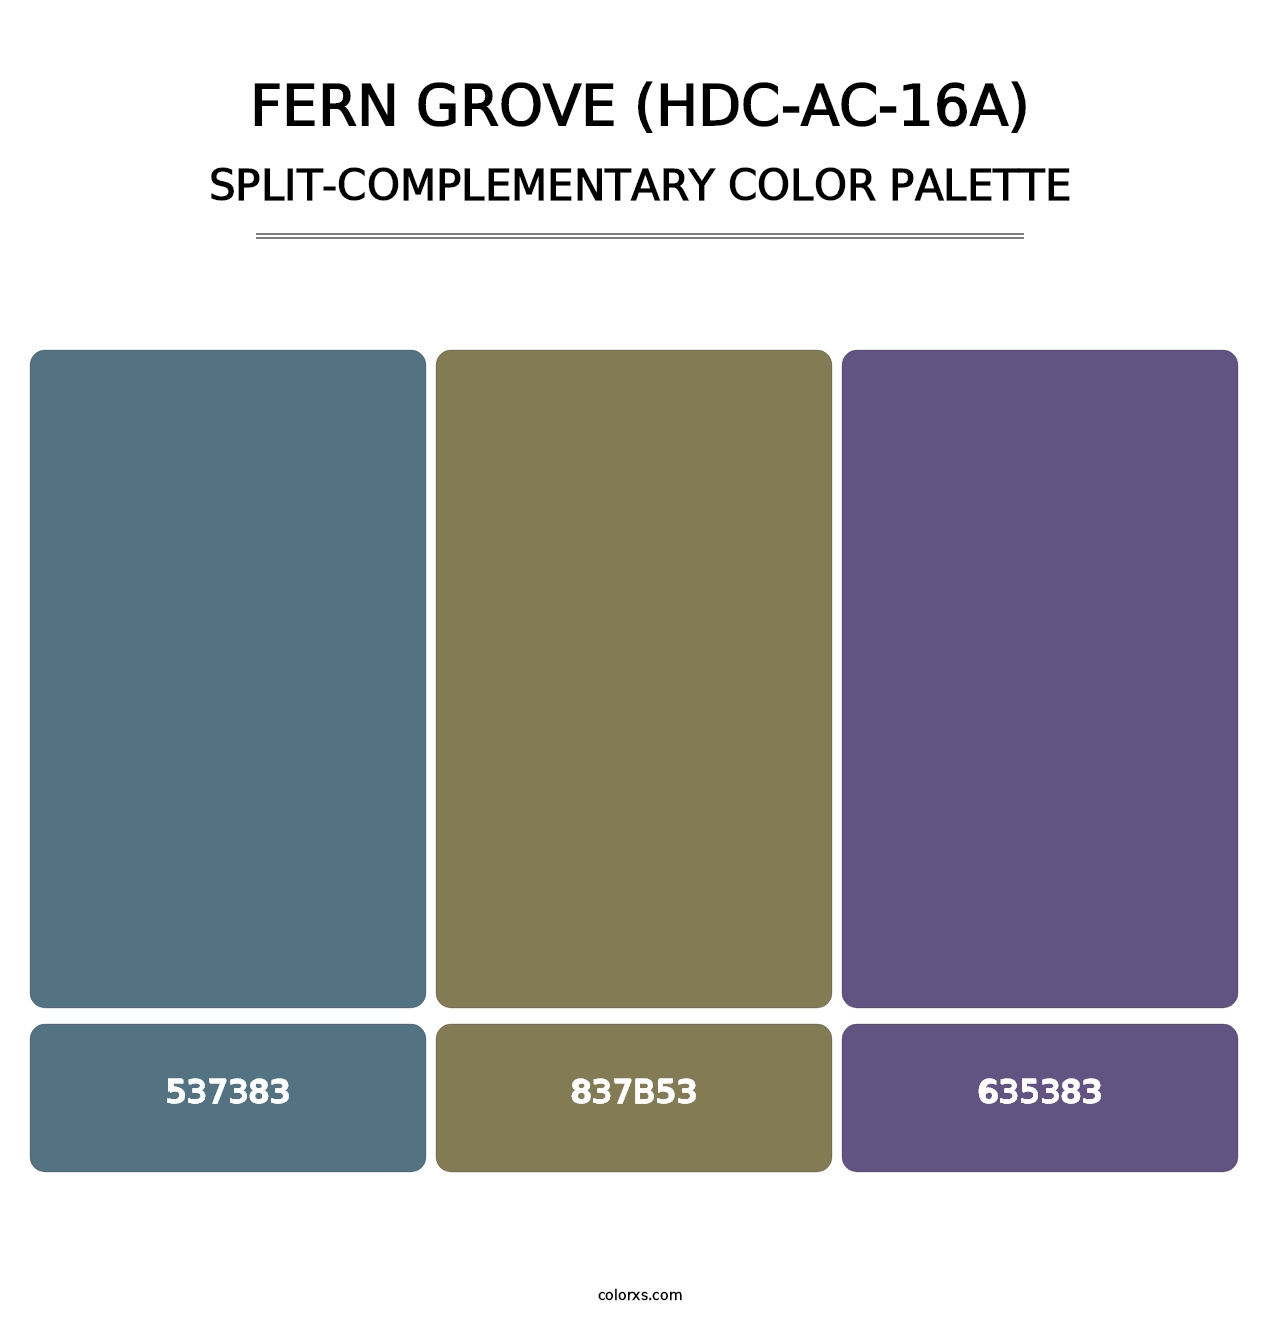 Fern Grove (HDC-AC-16A) - Split-Complementary Color Palette